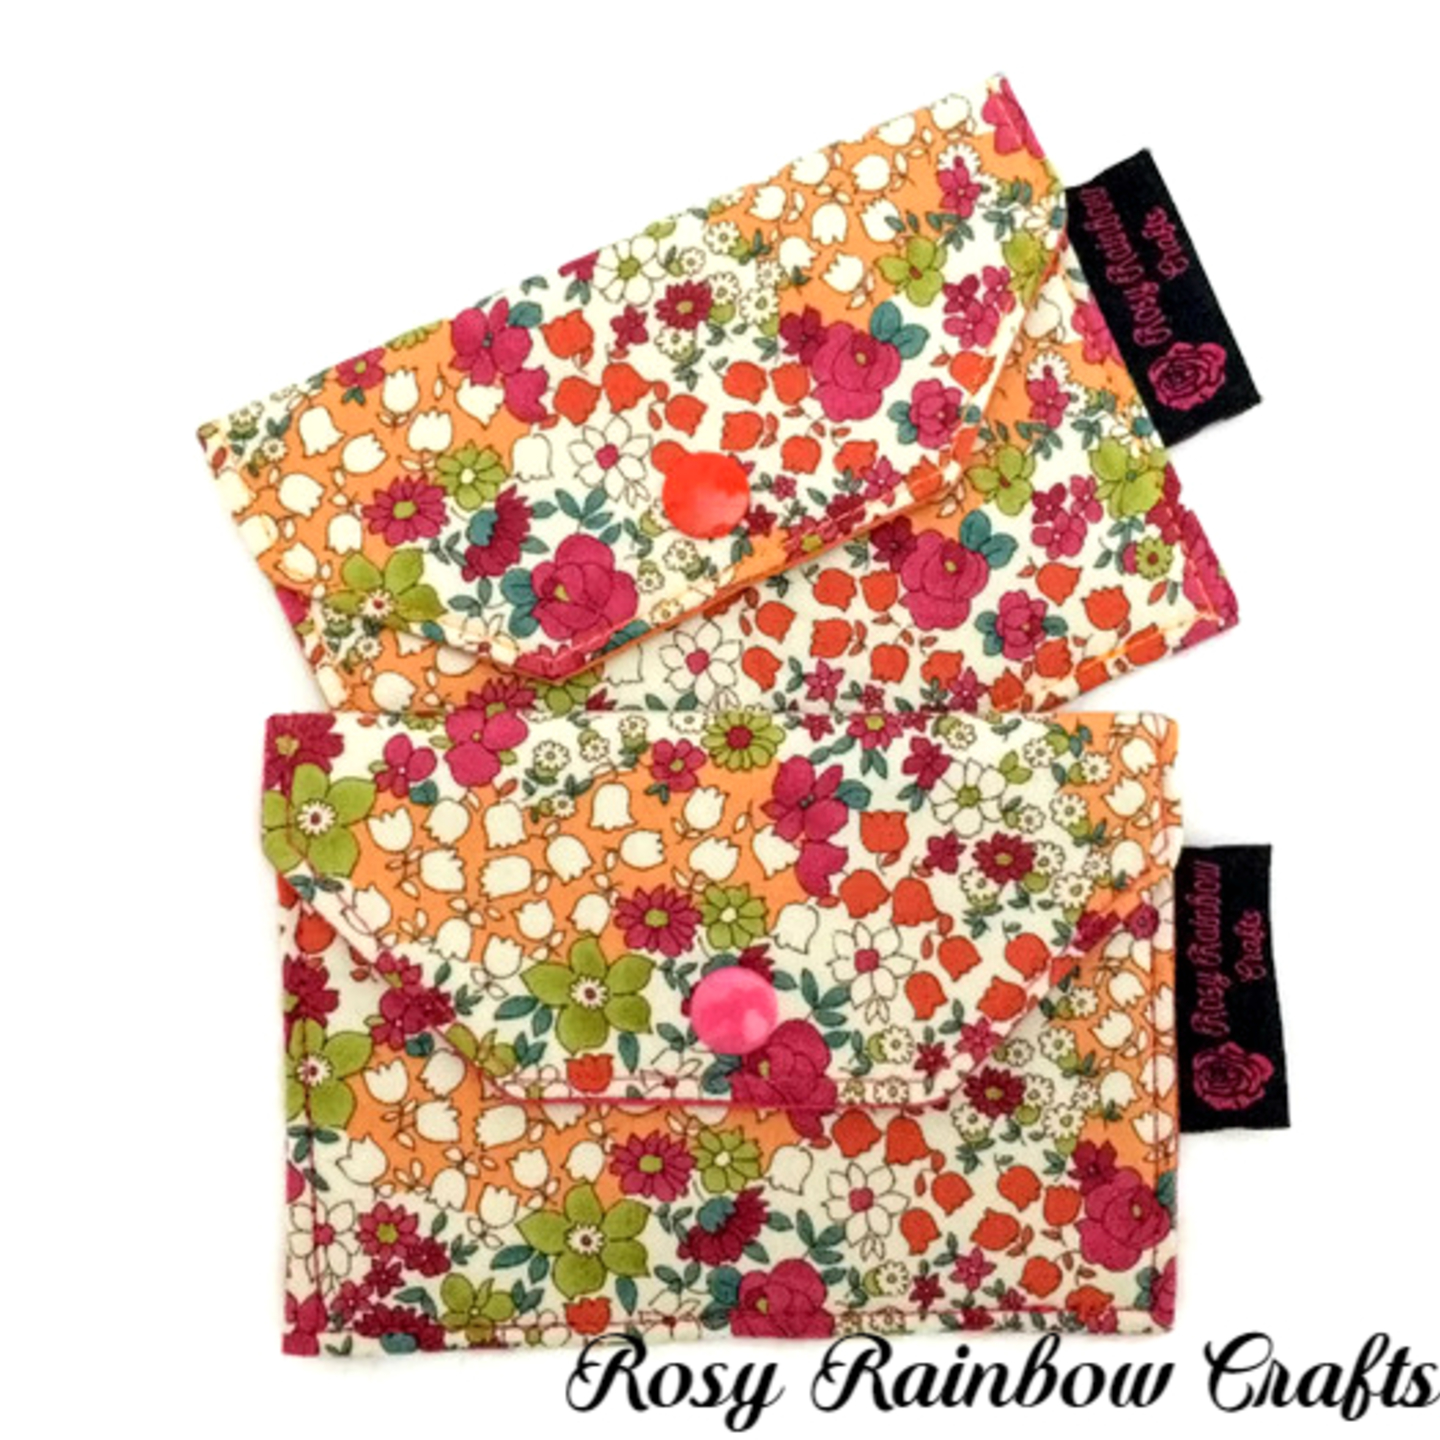 Exclusive Handmade CardCoins Case In Floral Prints